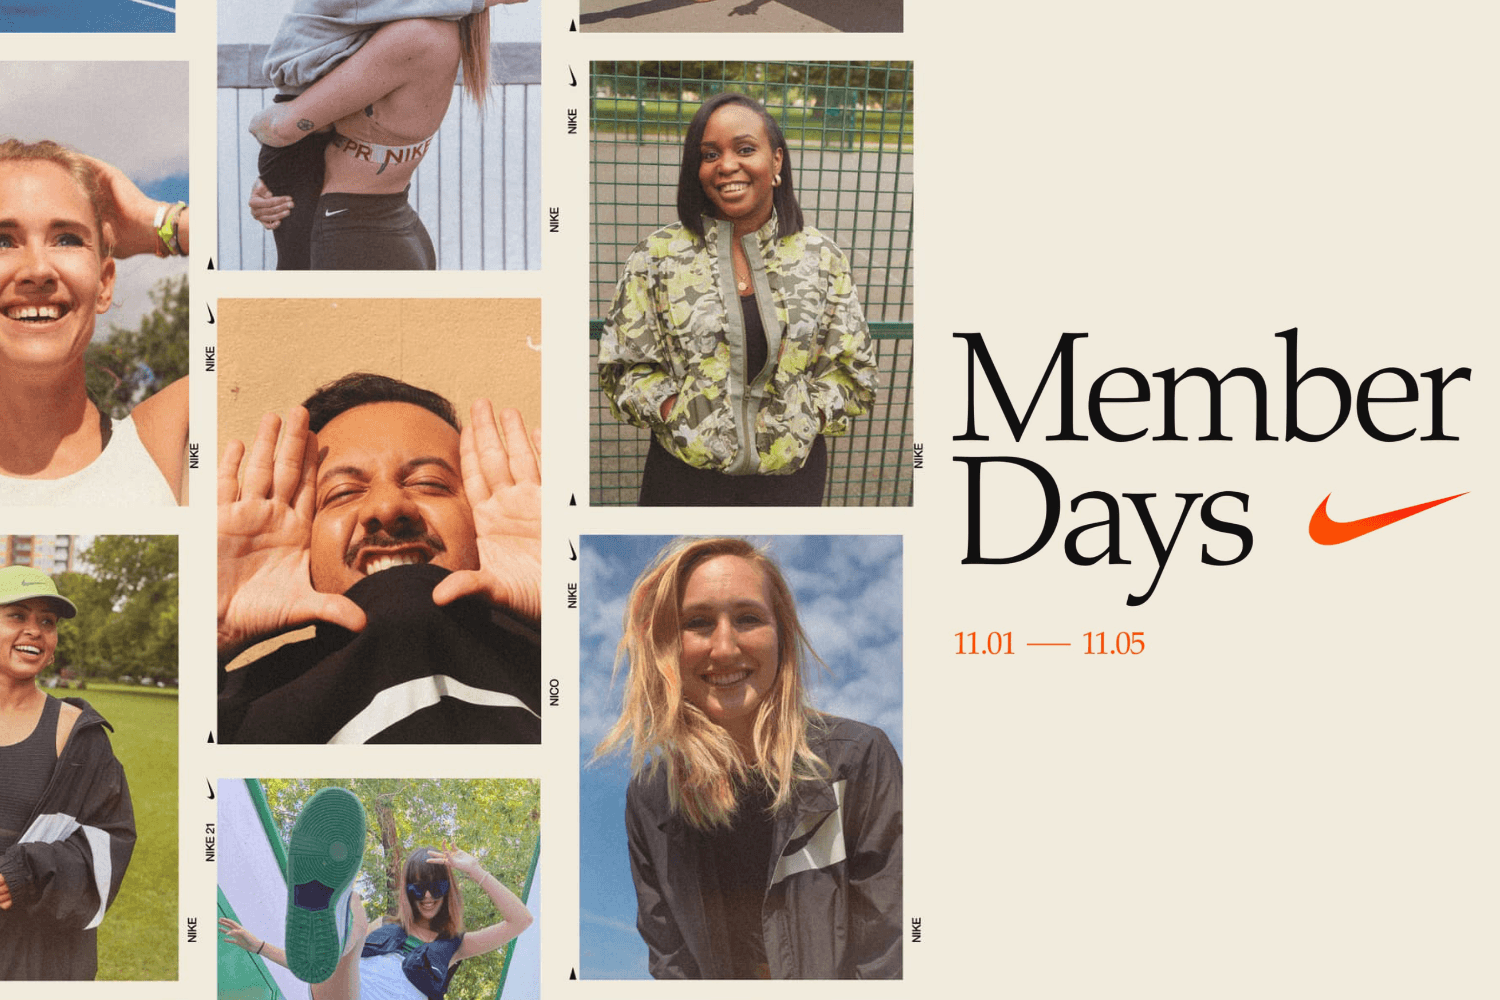 Be part of the Nike Member Days and get inspired